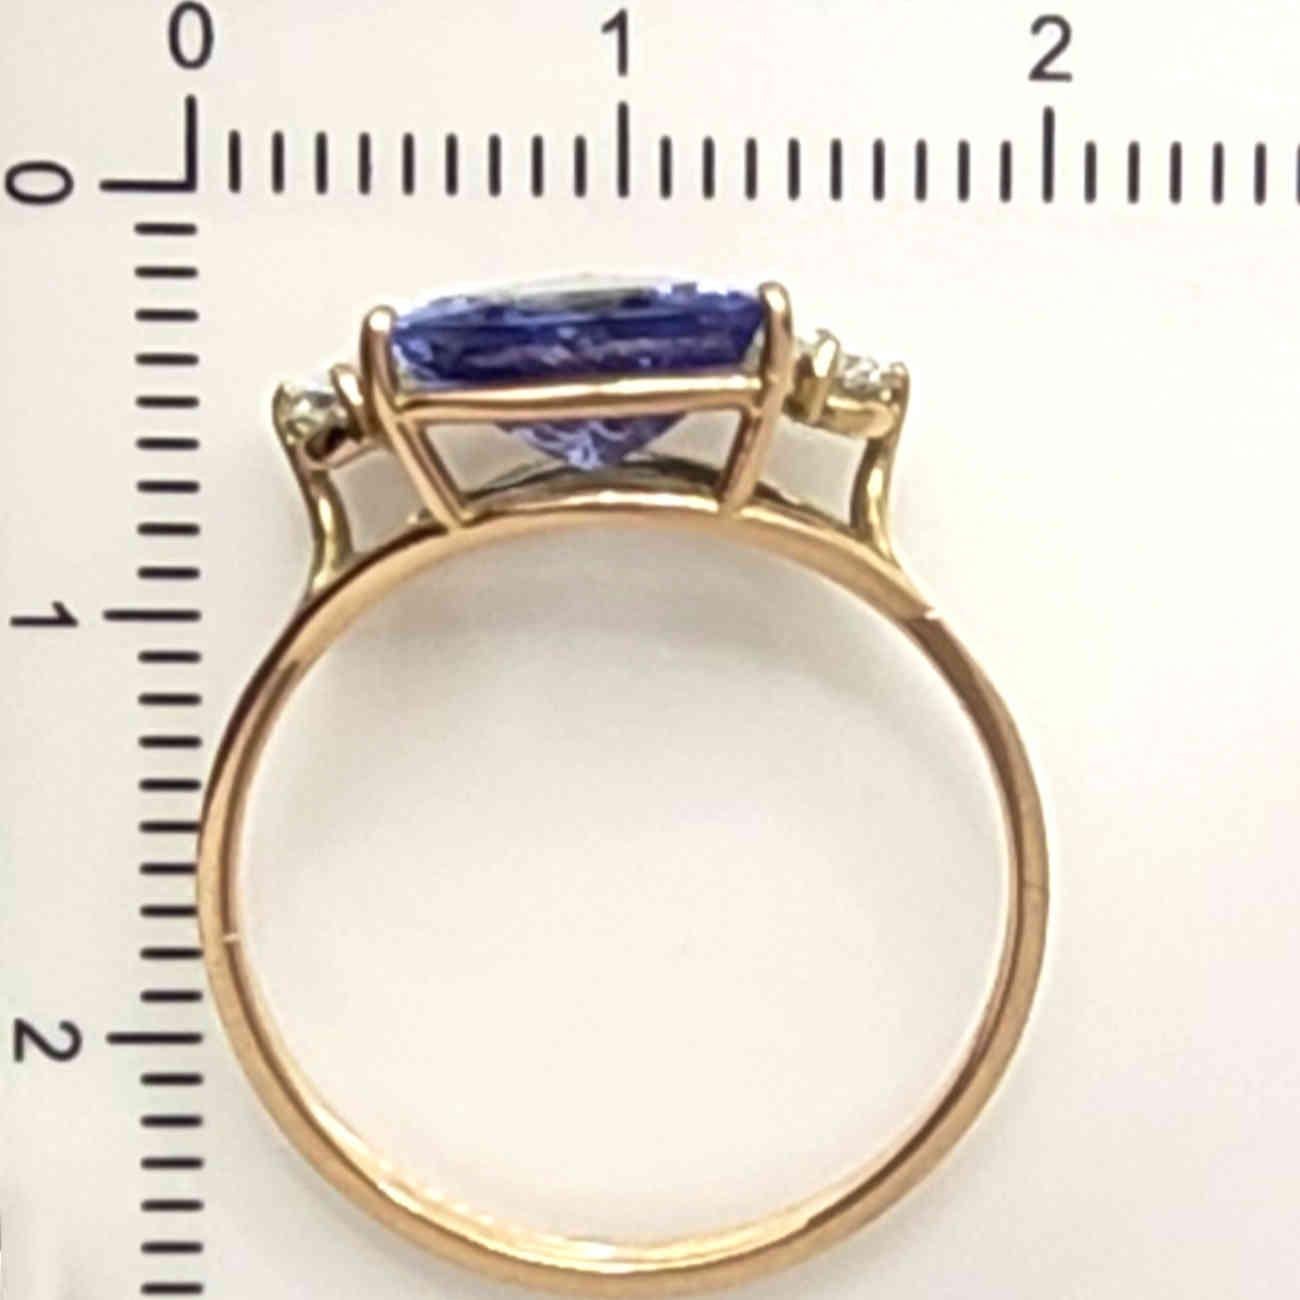 IGE Certified 1.9 Carat Tanzanite Diamonds Cocktail Ring  For Sale 8